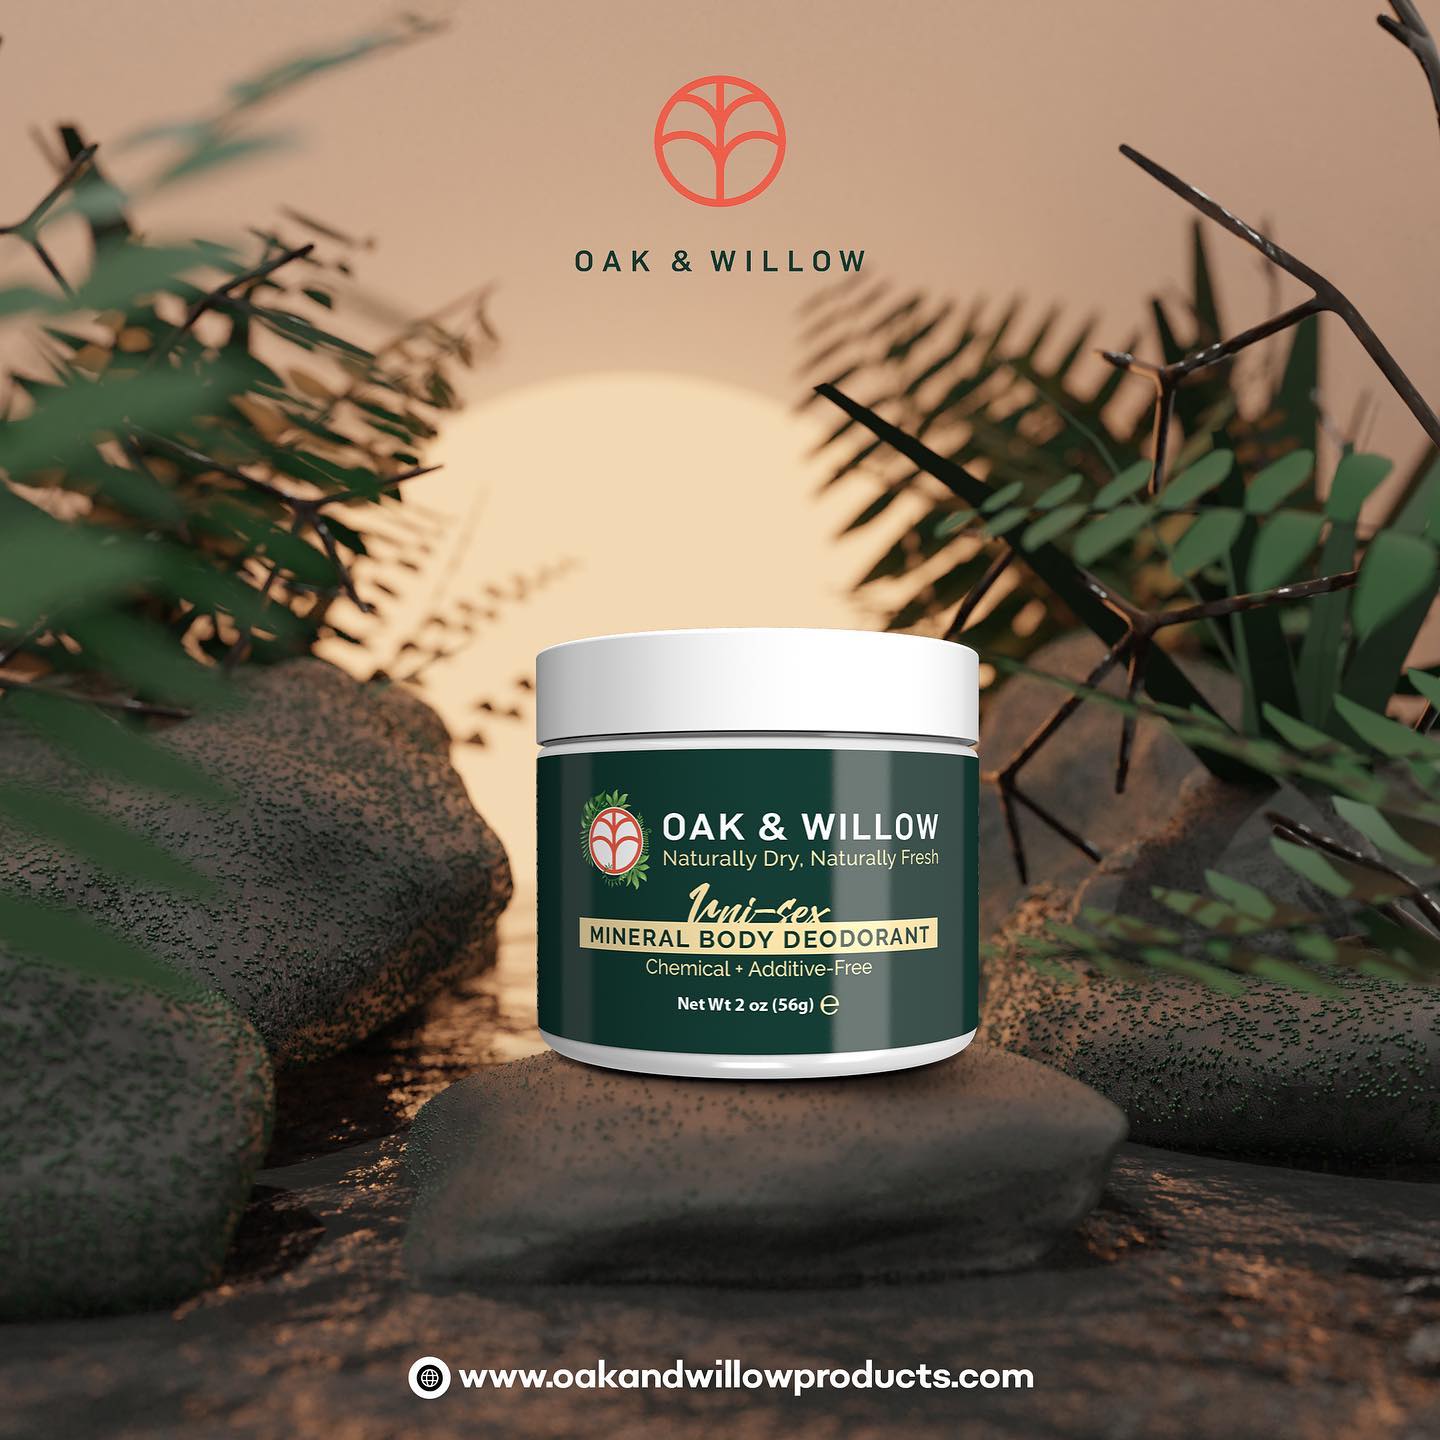 Oak and Willow, an all-natural scented mineral body deodorant, officially launches